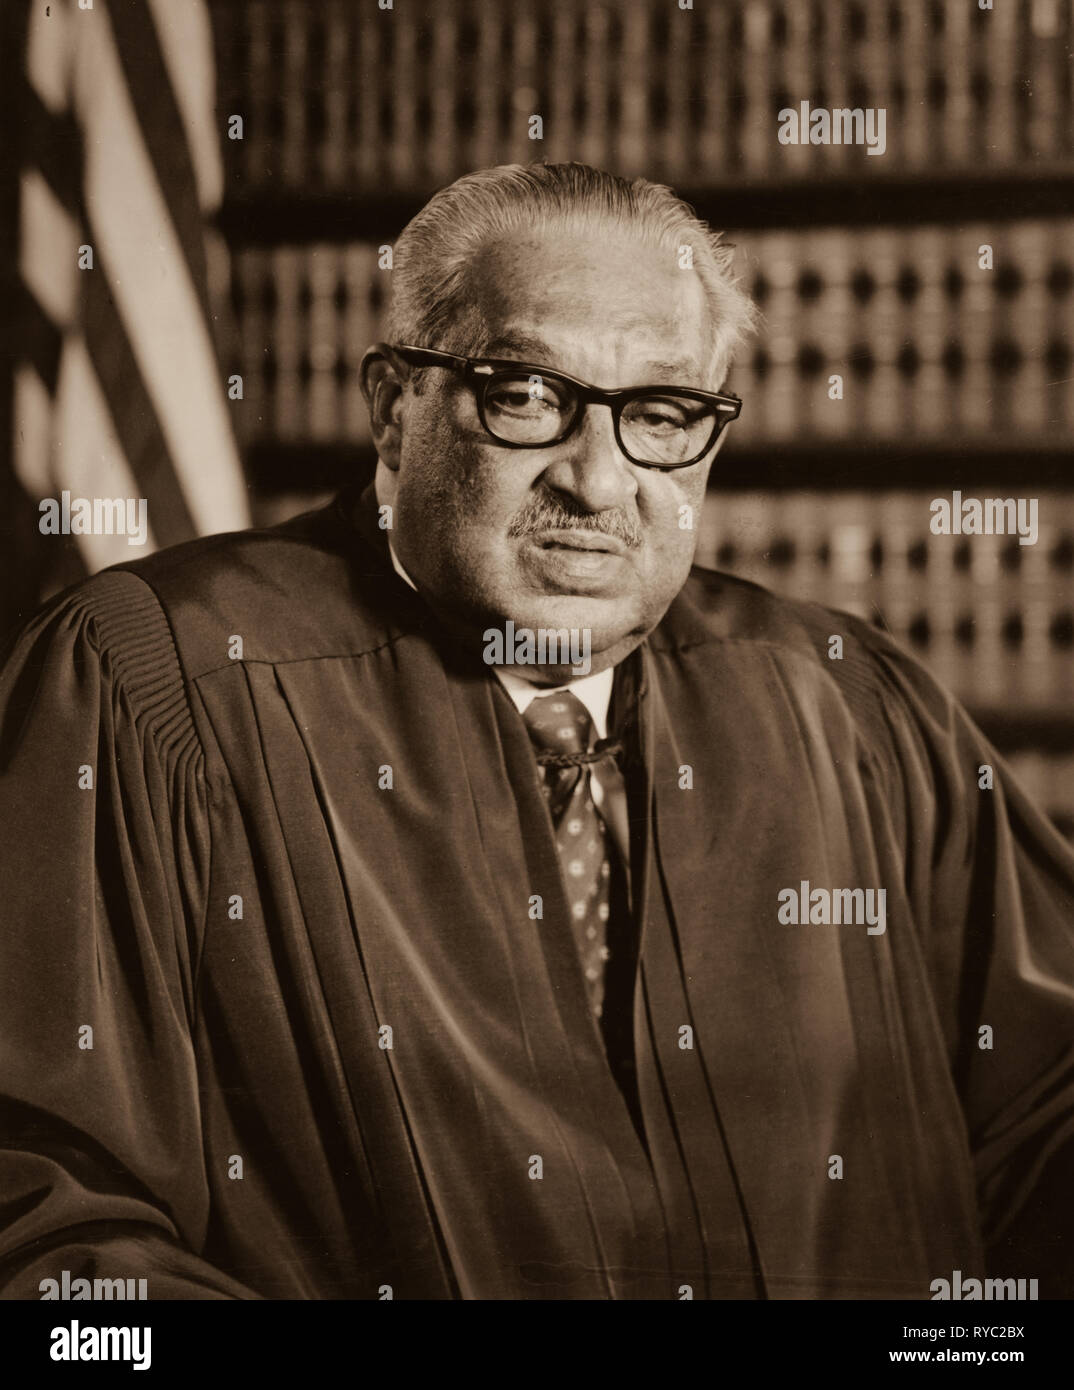 Thurgood Marshall, Associate Justice of the United States Supreme Court in his judicial robes at his Supreme Court offices. January 28, 1976 Stock Photo